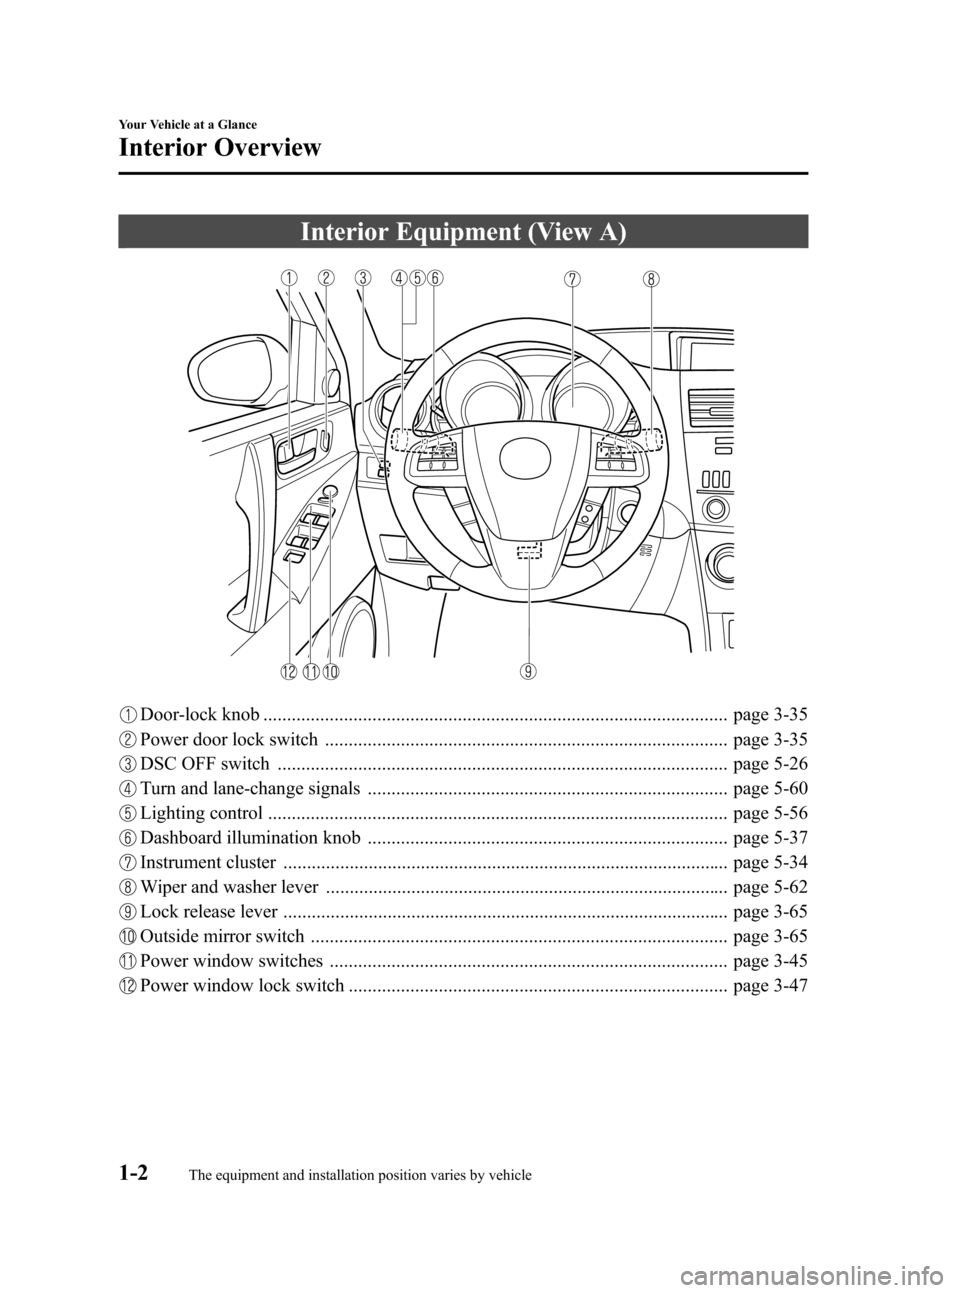 MAZDA MODEL 3 HATCHBACK 2010  Owners Manual (in English) Black plate (8,1)
Interior Equipment (View A)
Door-lock knob .................................................................................................. page 3-35
Power door lock switch .......